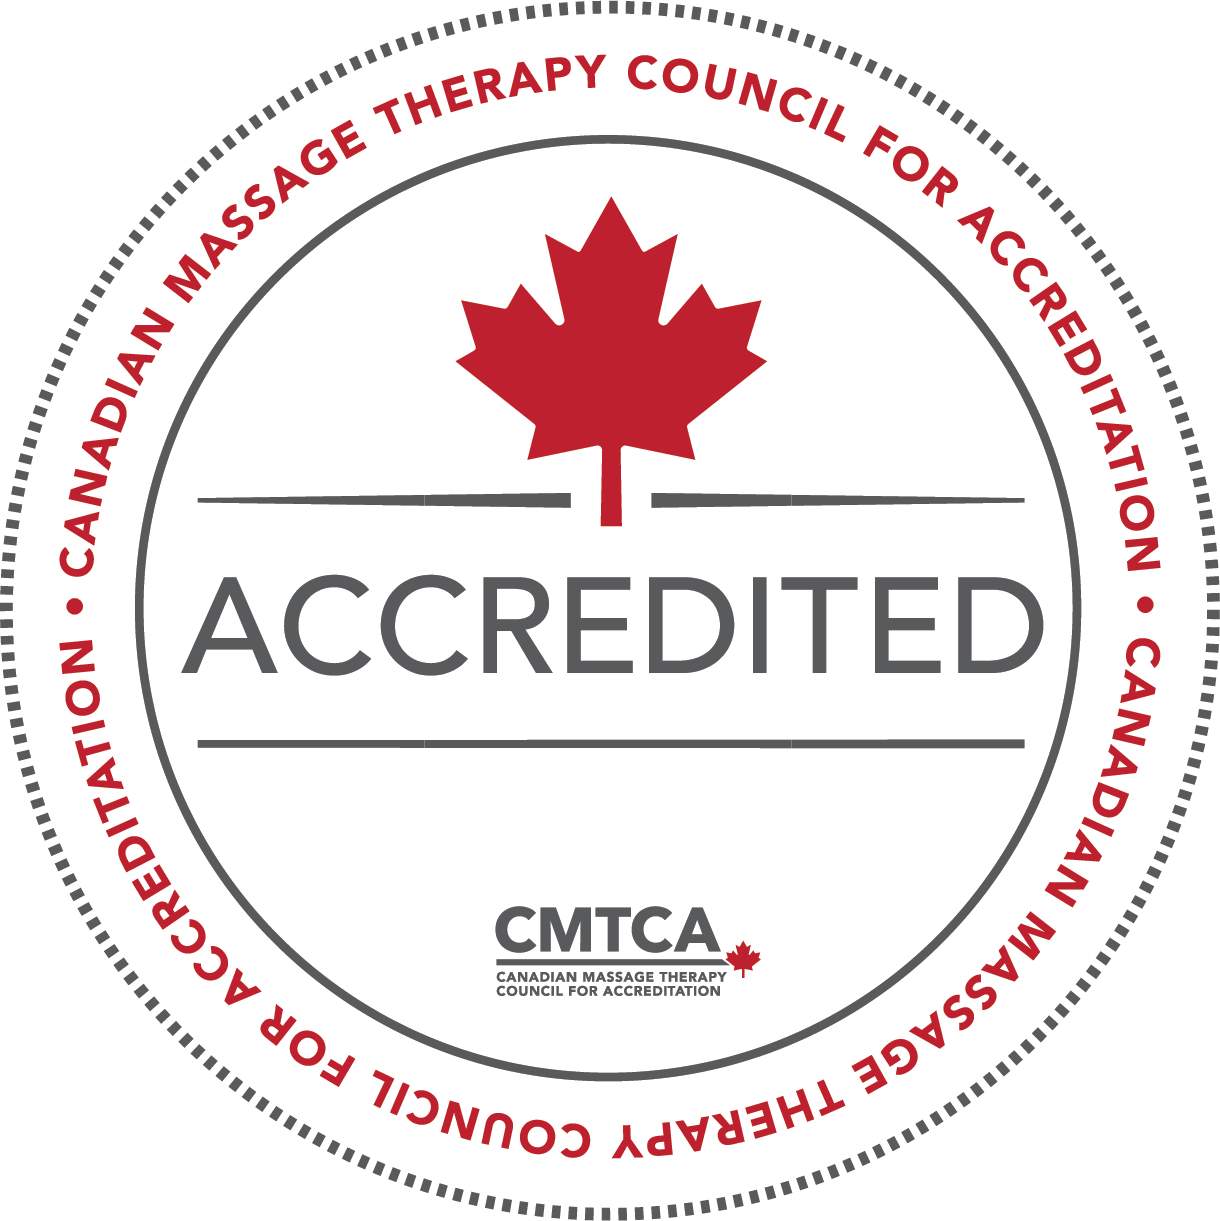  Preliminary Accreditation, the first step in the CMTCA accreditation process